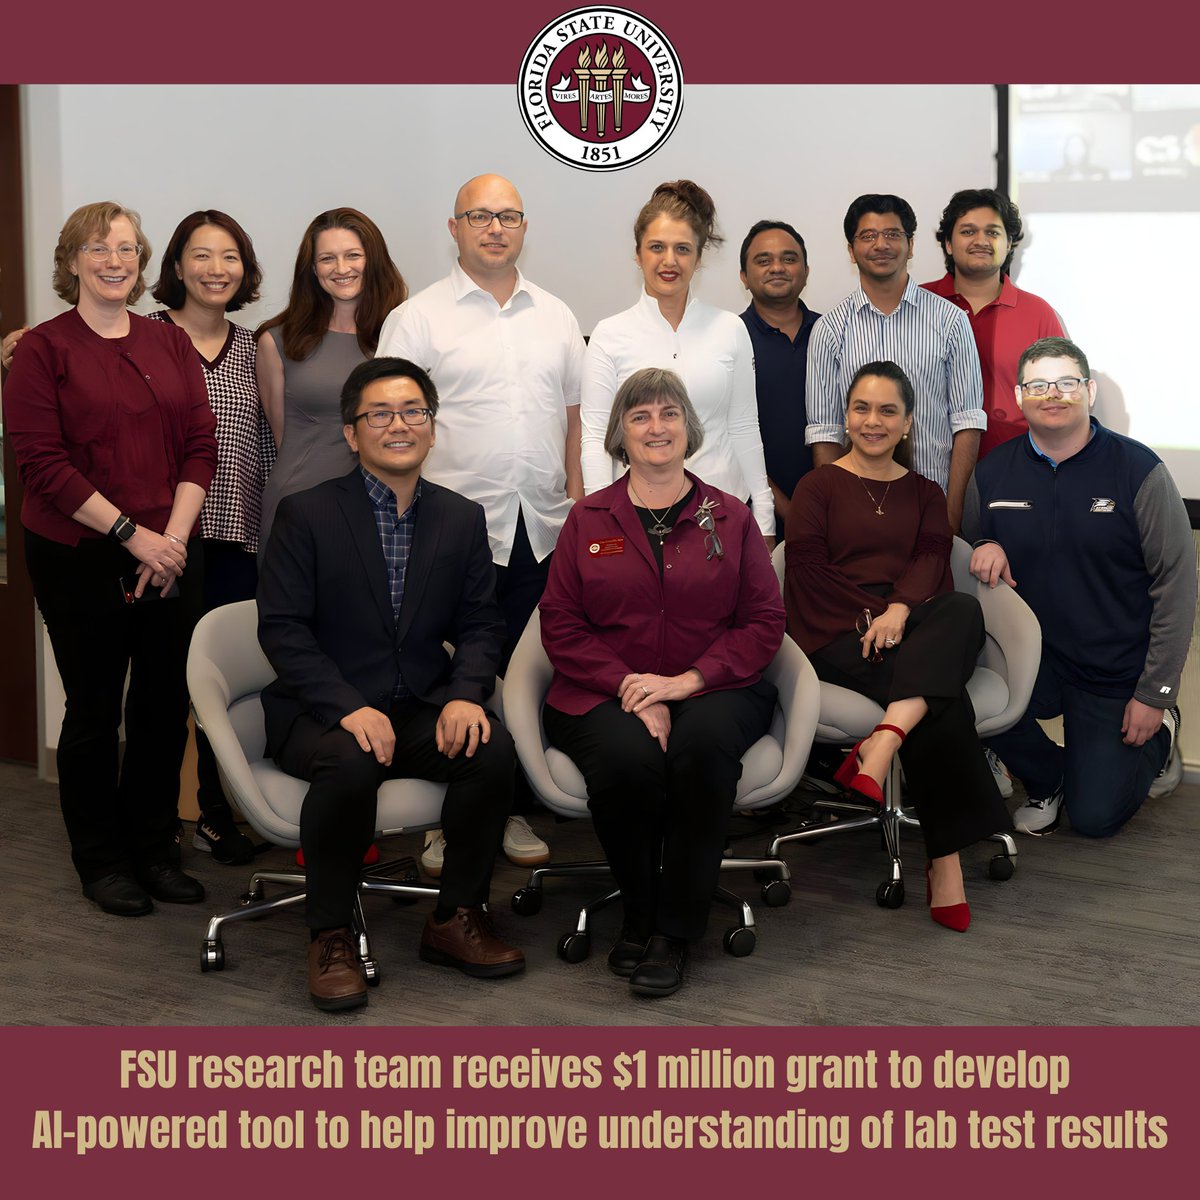 Exciting News! Our own Dean Jing Wang (Expert Advisory Board) and Professor Henna Budhwani are part of an FSU research team awarded $1 million from AHRQ to develop LabGenie, an AI tool to help patients understand their lab results. Learn more here:  bit.ly/3WeoQA8